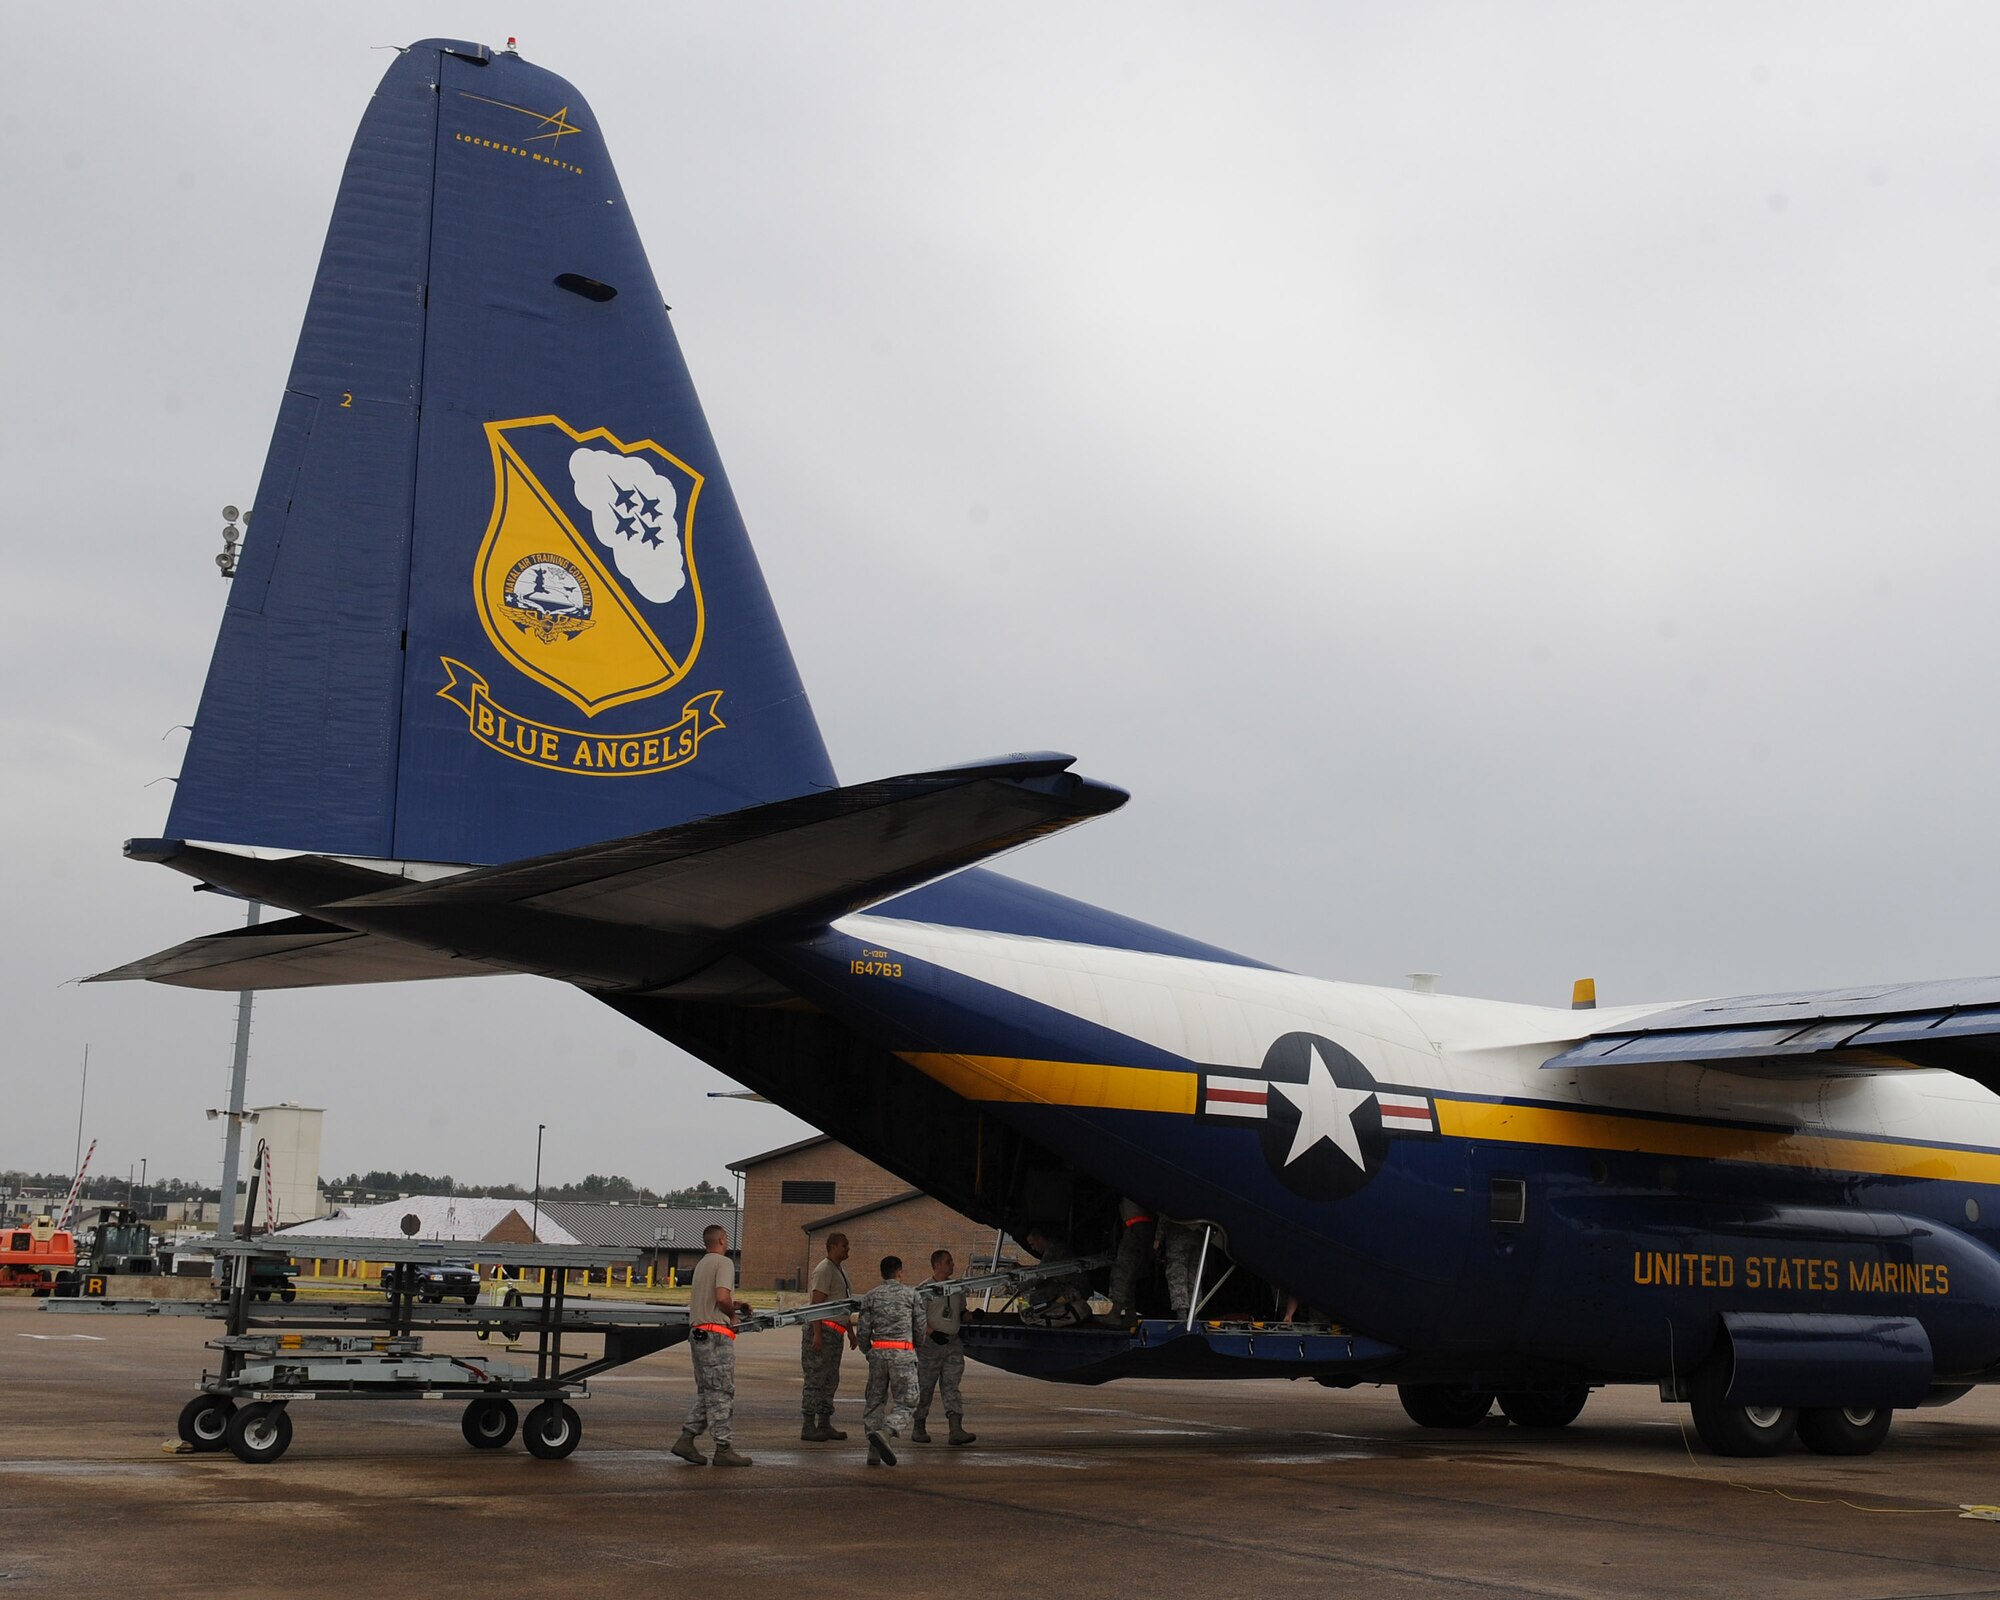 Airmen from the 314th Aircraft Maintenance Squadron remove a dual rail from the Blue Angels C-130T Hercules nicknamed “Fat Albert” Dec. 16, 2011, at Little Rock Air Force Base, Ark. The 314th duel rail shop has worked on “Fat Albert” for over 10 years preparing the aircraft for the team’s demonstration season.   The Blue Angels will headline the open house and air show at Little Rock AFB scheduled for Sept.  8 and 9. (U.S. Air Force photo by Tech. Sgt. Chad Chisholm)